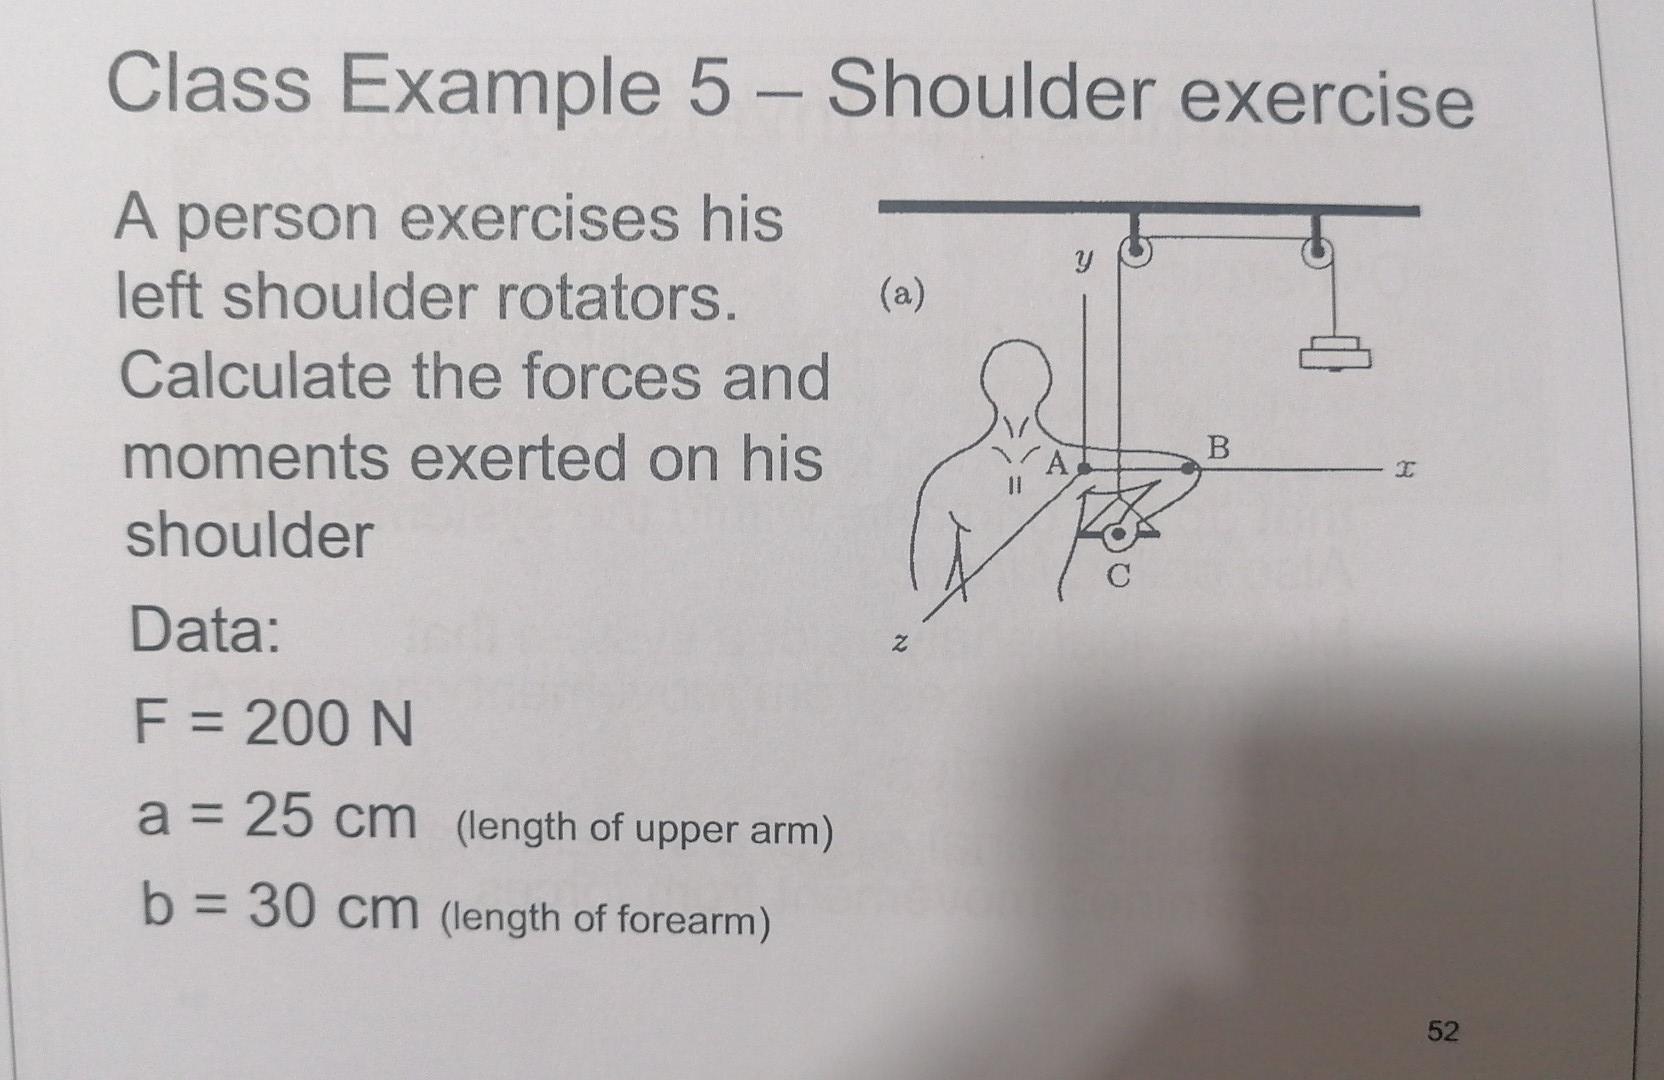 Solved Class Example 5 - Shoulder exercise A person | Chegg.com